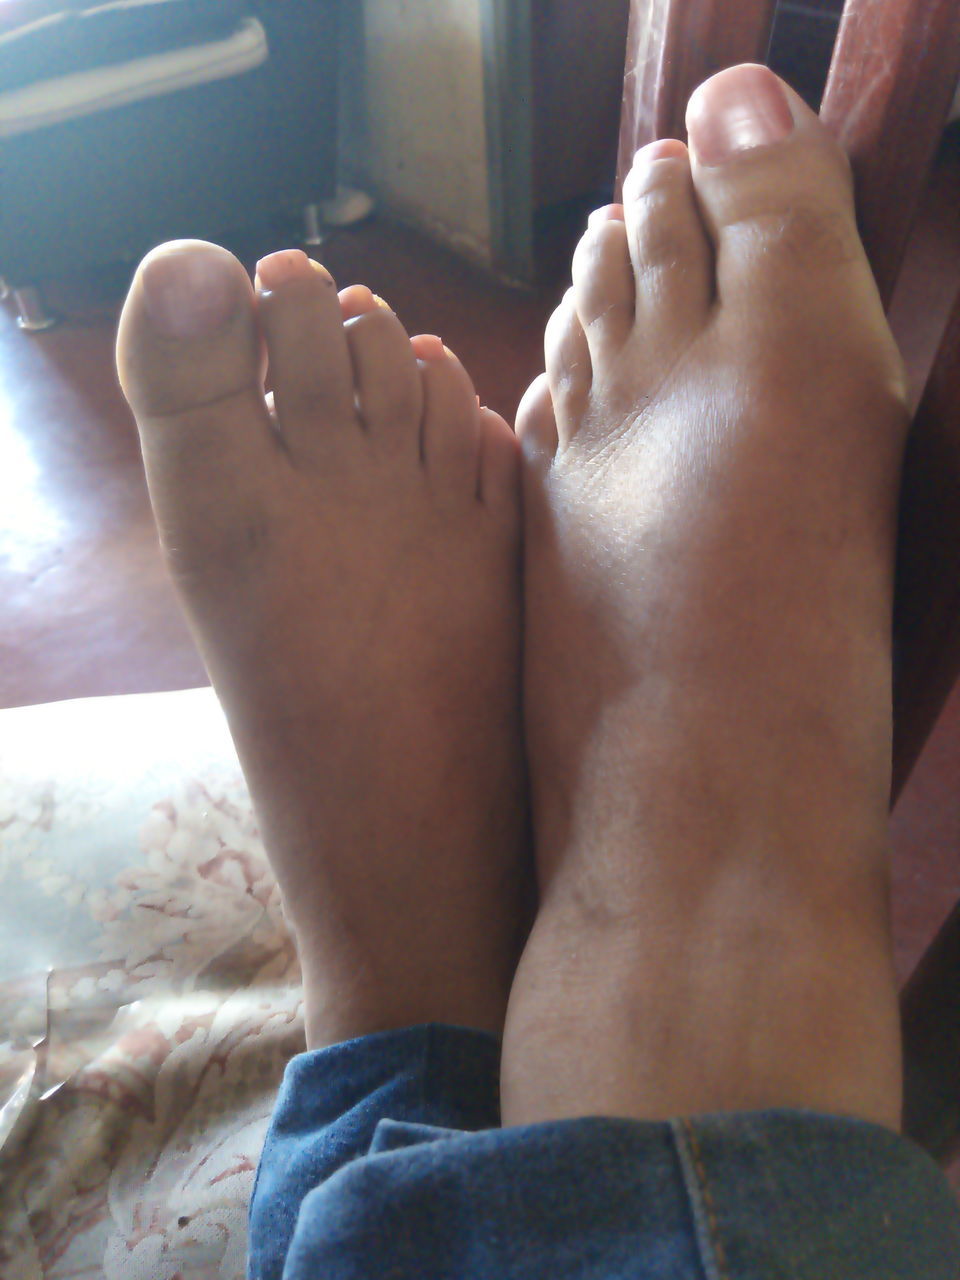 human leg, barefoot, human foot, low section, toe, indoors, adult, relaxation, limb, one person, human limb, sole of foot, arm, lifestyles, women, resting, personal perspective, hand, finger, close-up, leisure activity, home interior, lying down